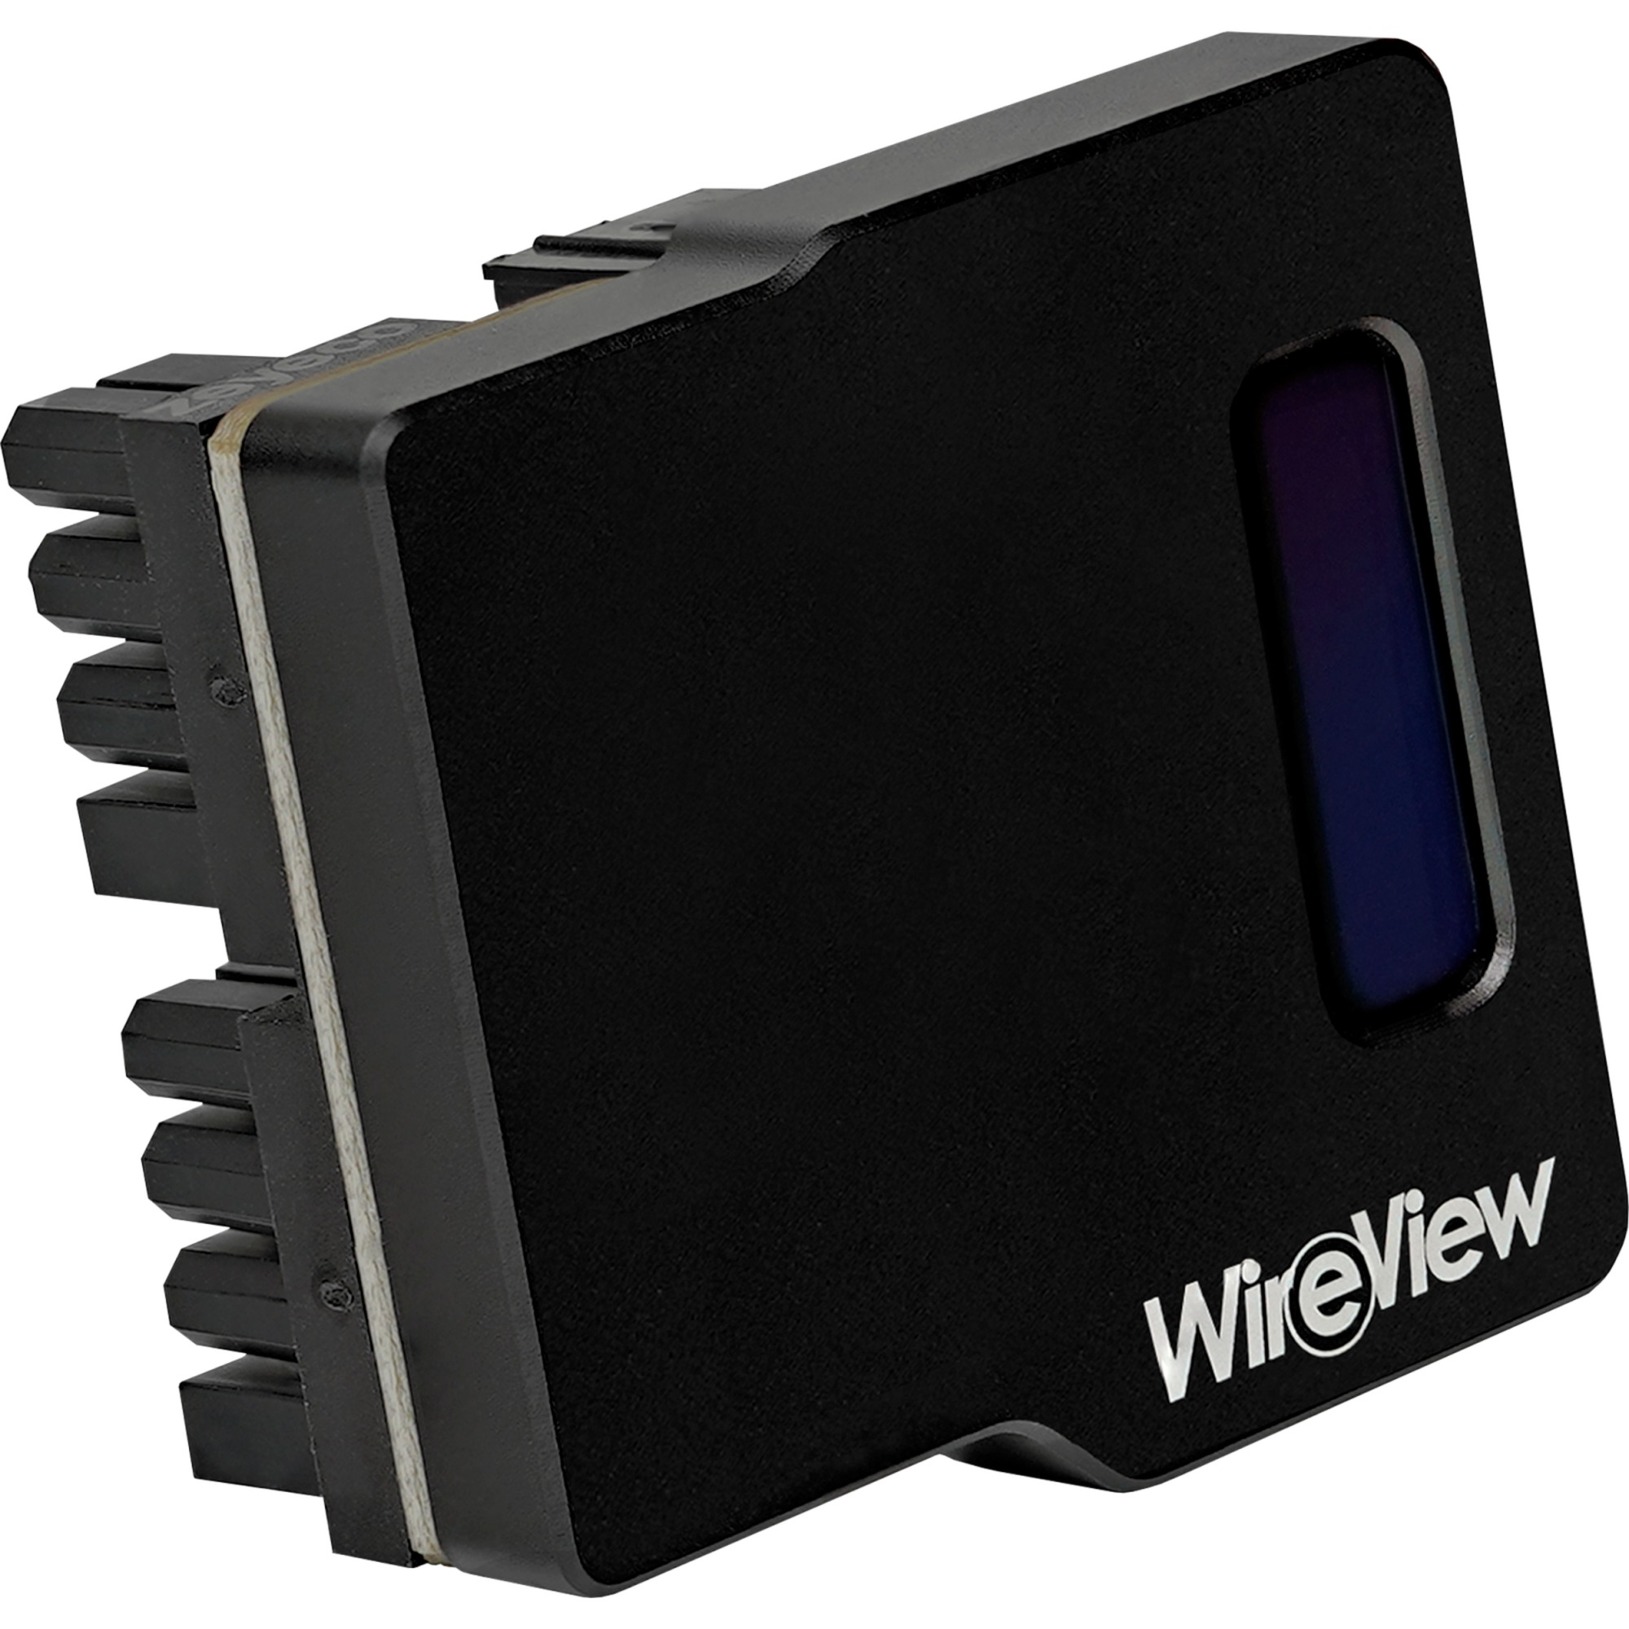 Thermal Grizzly WireView GPU, 2x 8-Pin PCIe - Reverse (TG-WV-P28R)